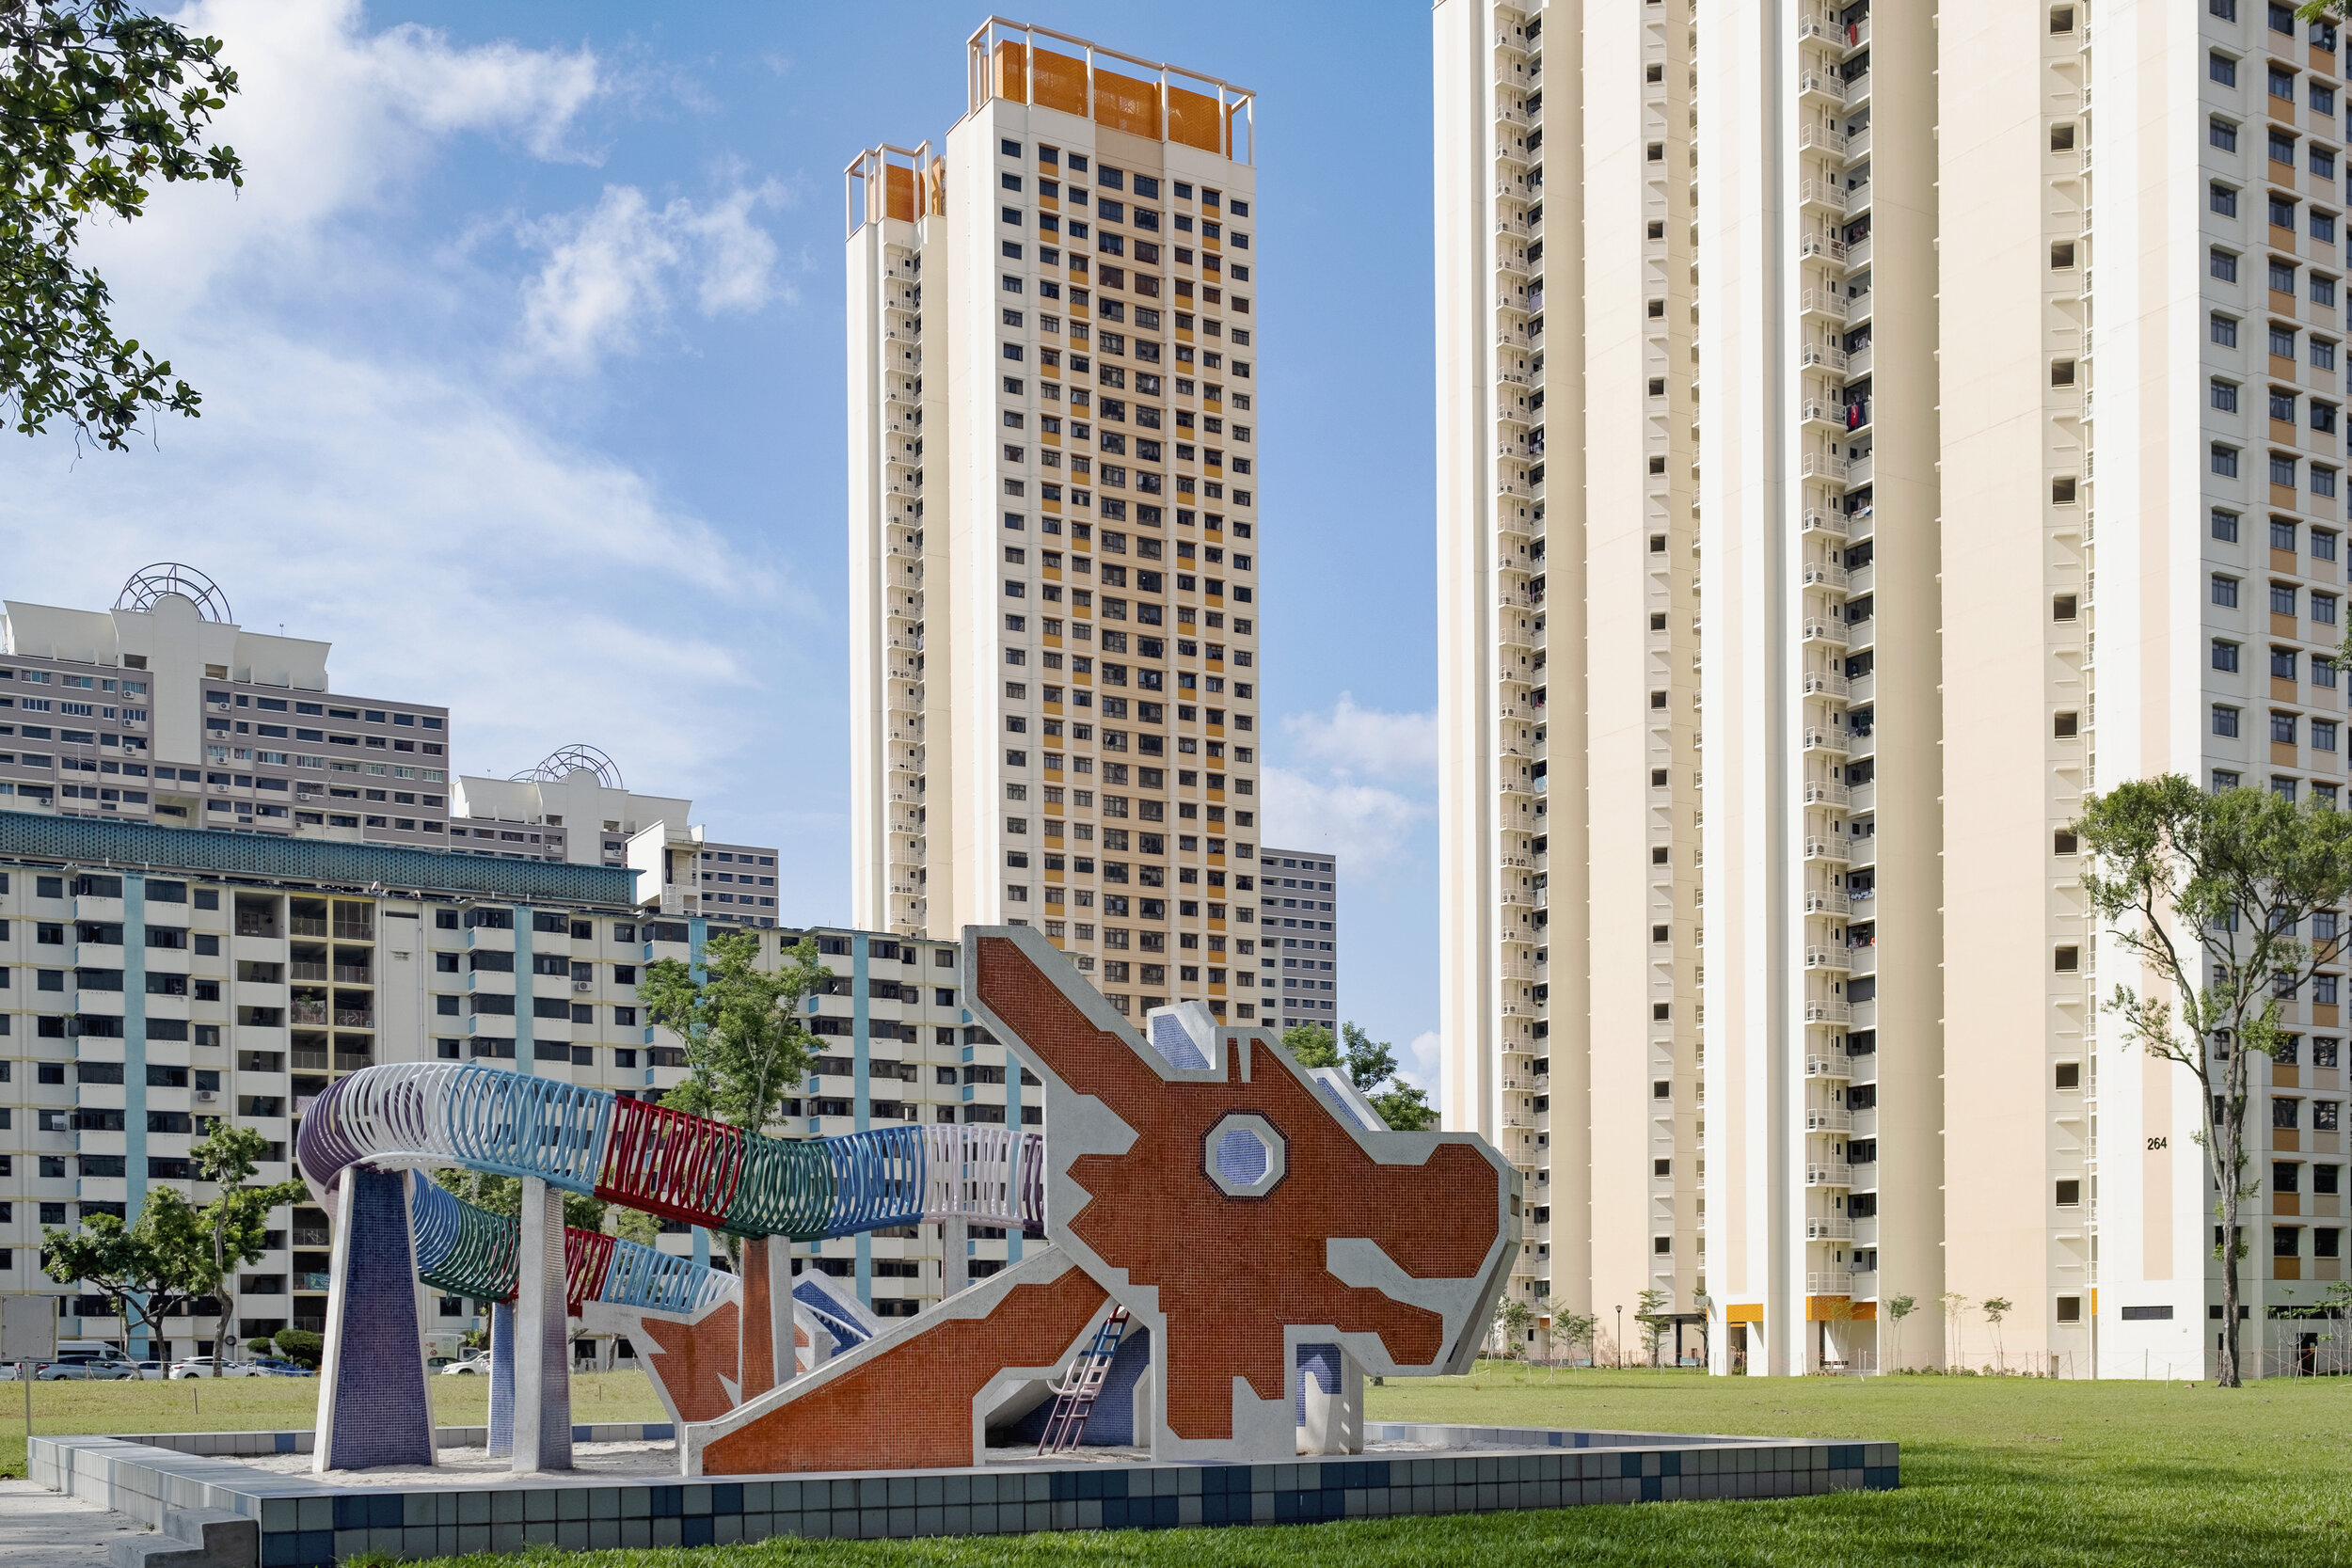  The Dragon Playground, one of two remaining playgrounds built for public housing estates by the Housing Development Board (HDB) in the 1970s, is seen in the satellite town of Toa Payoh in central Singapore 